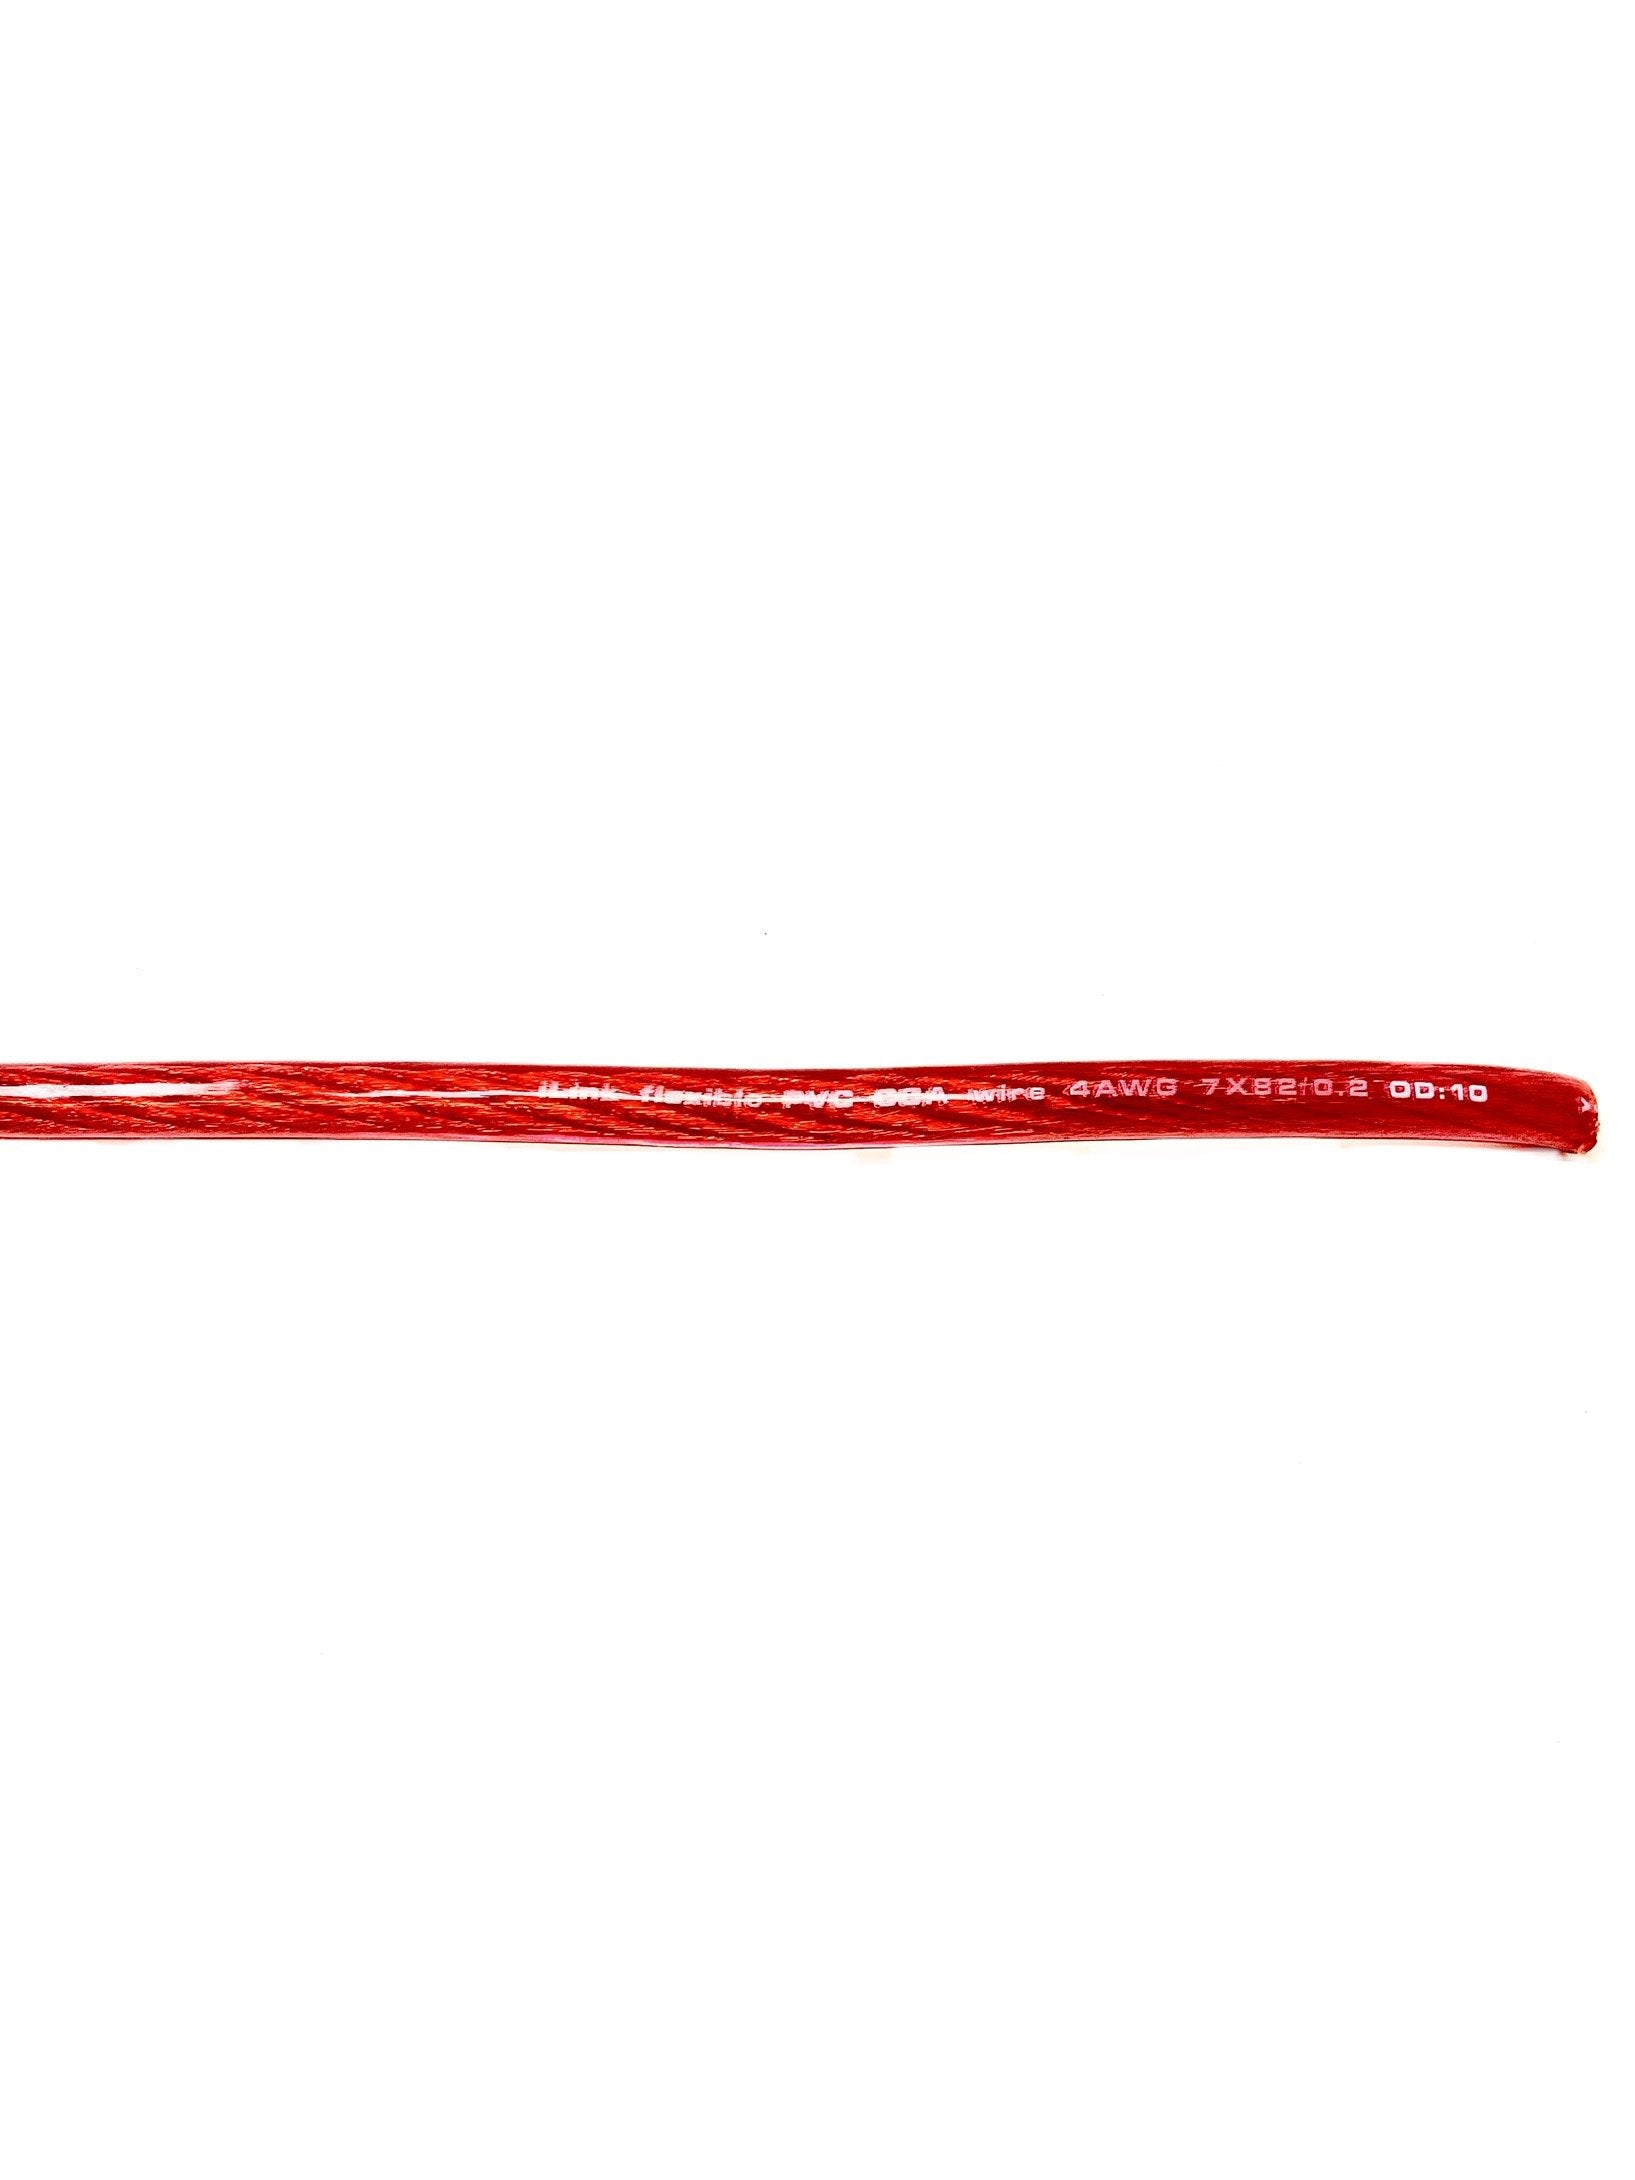 4 GOUGE RED POWER CABLE